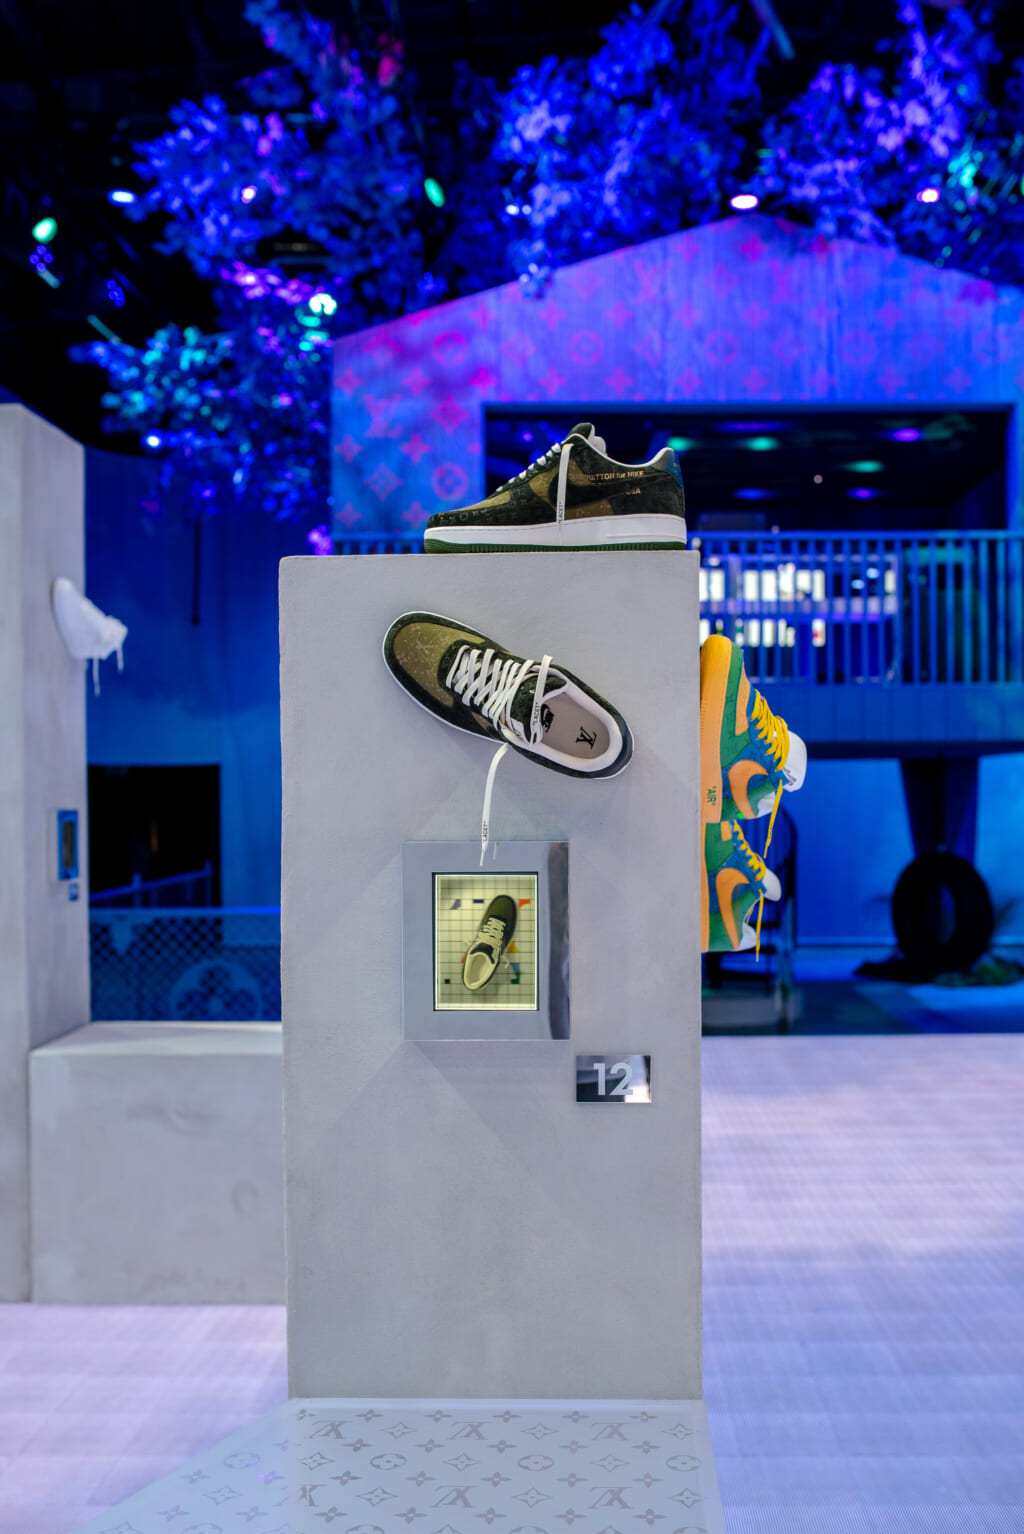 All the Shoes on Display at Louis Vuitton's Nike Air Force 1 Exhibition